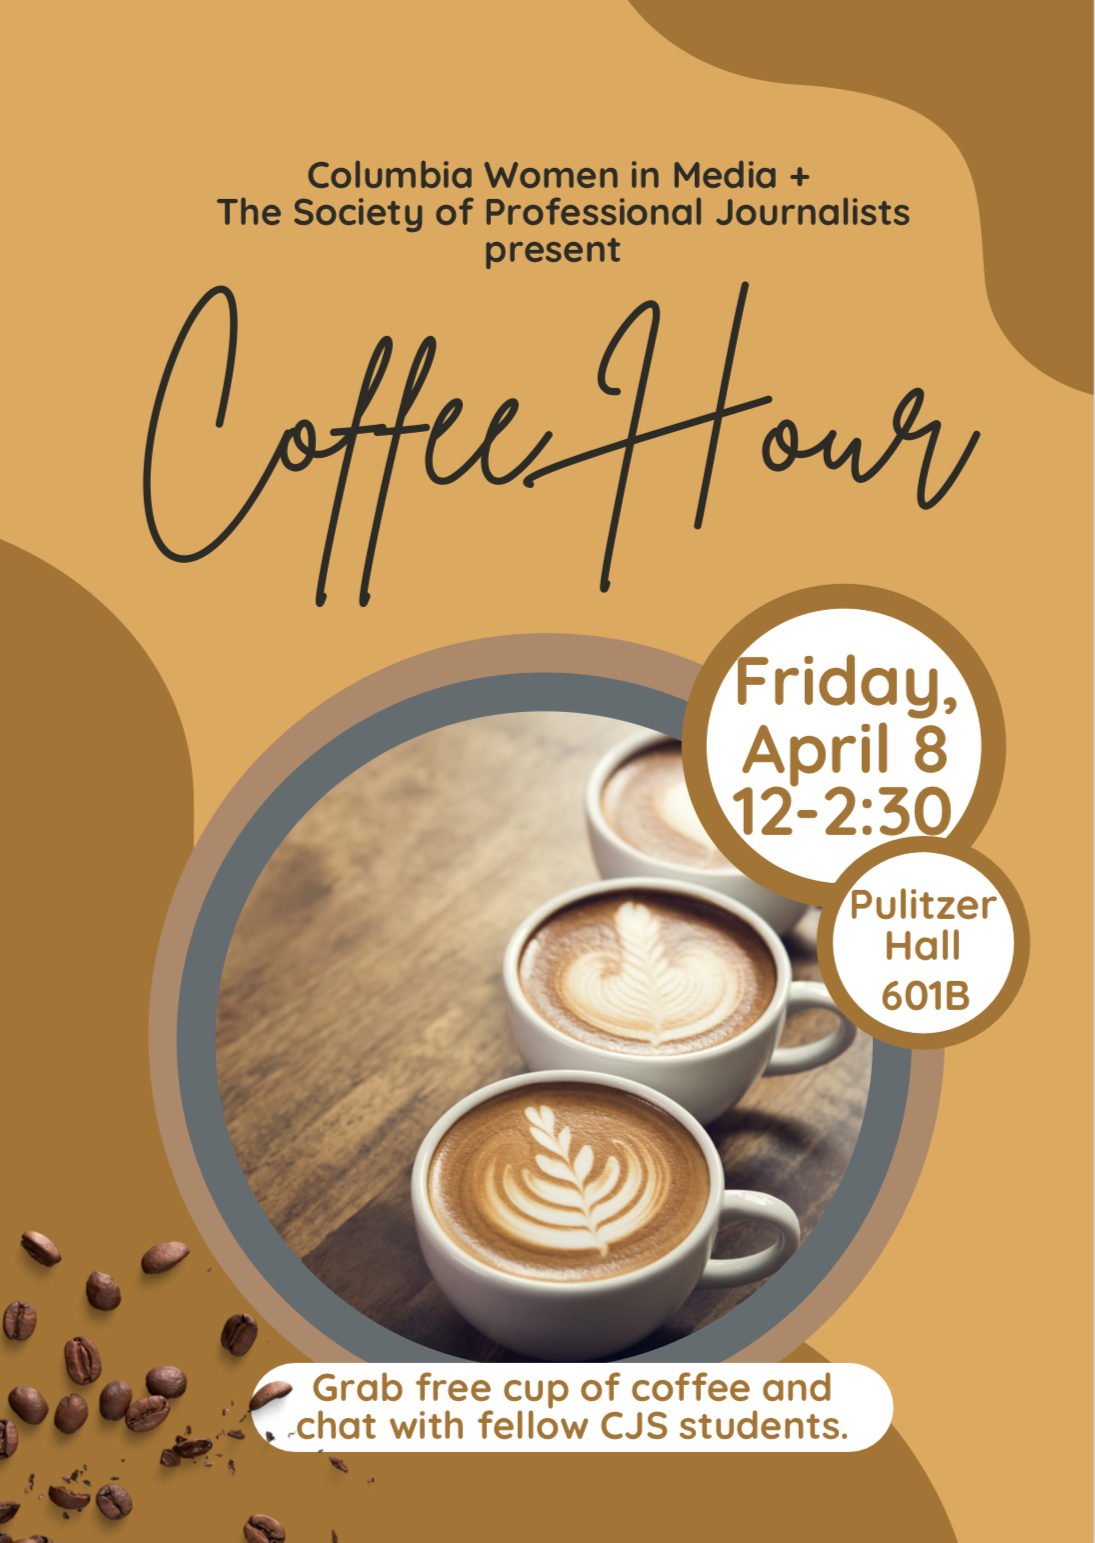 SPJ and women in media coffee hour event on Friday, April 8